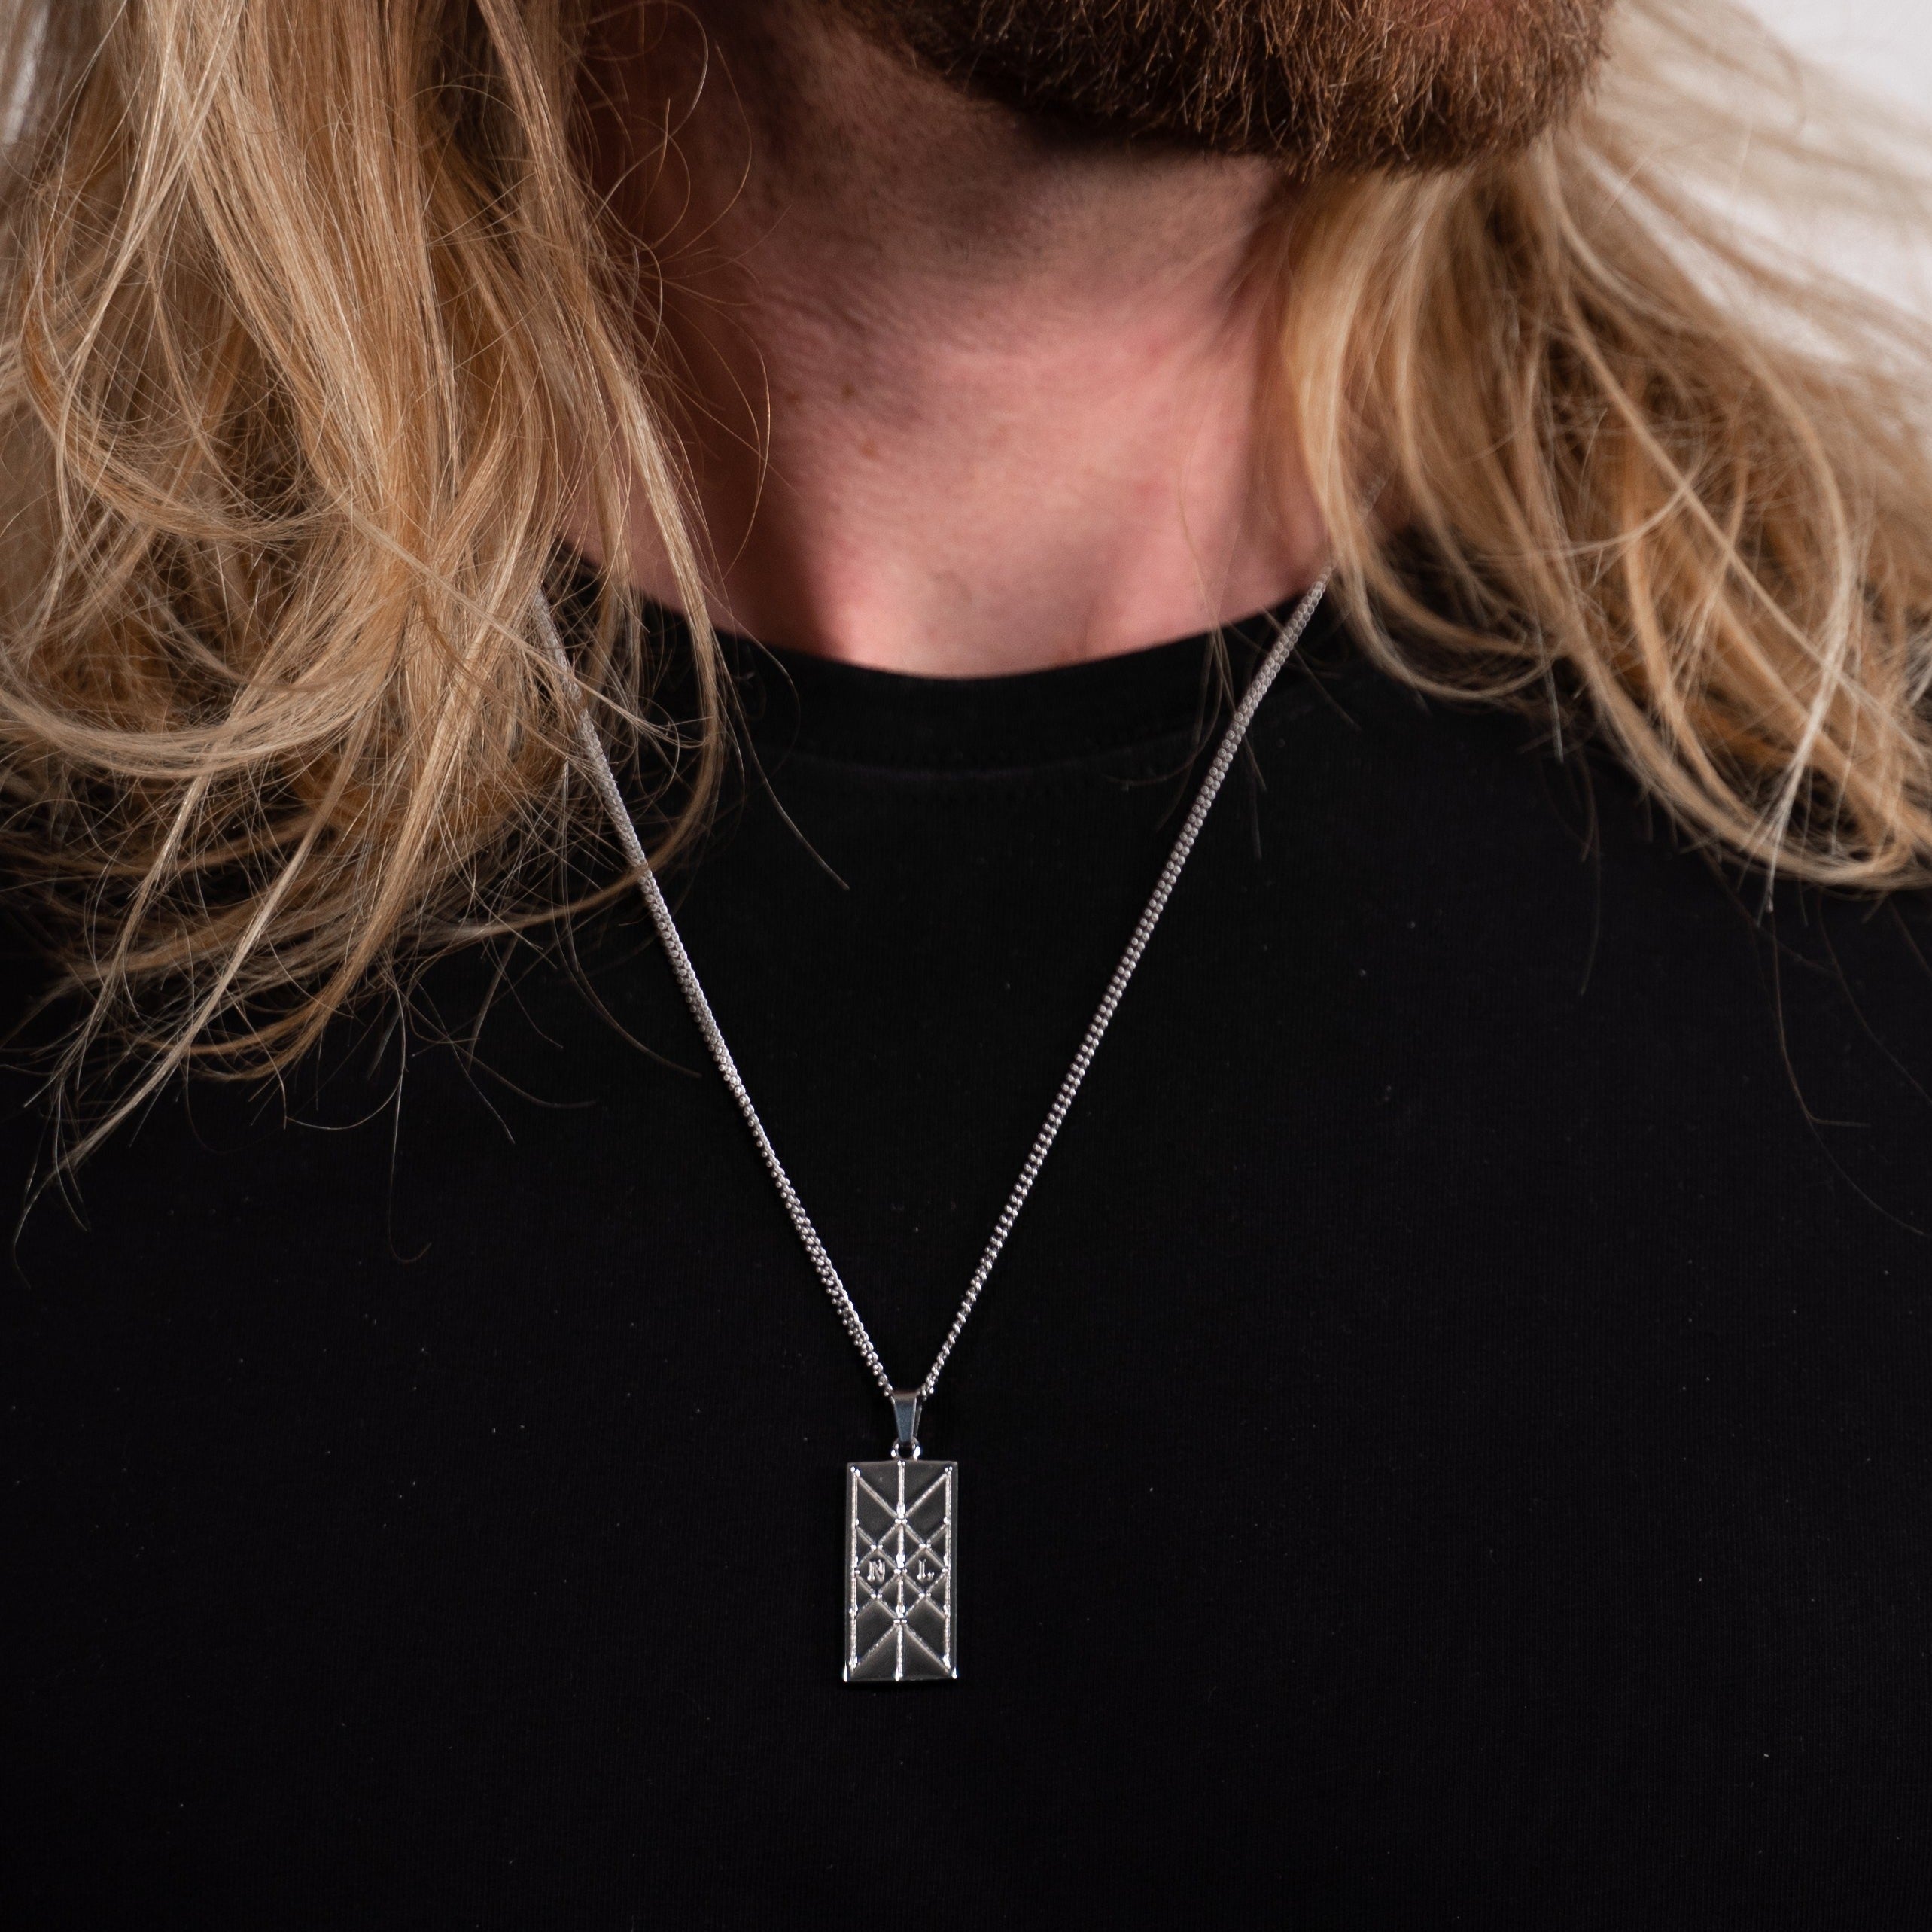 NL Web of Wyrd pendant - Silver-toned